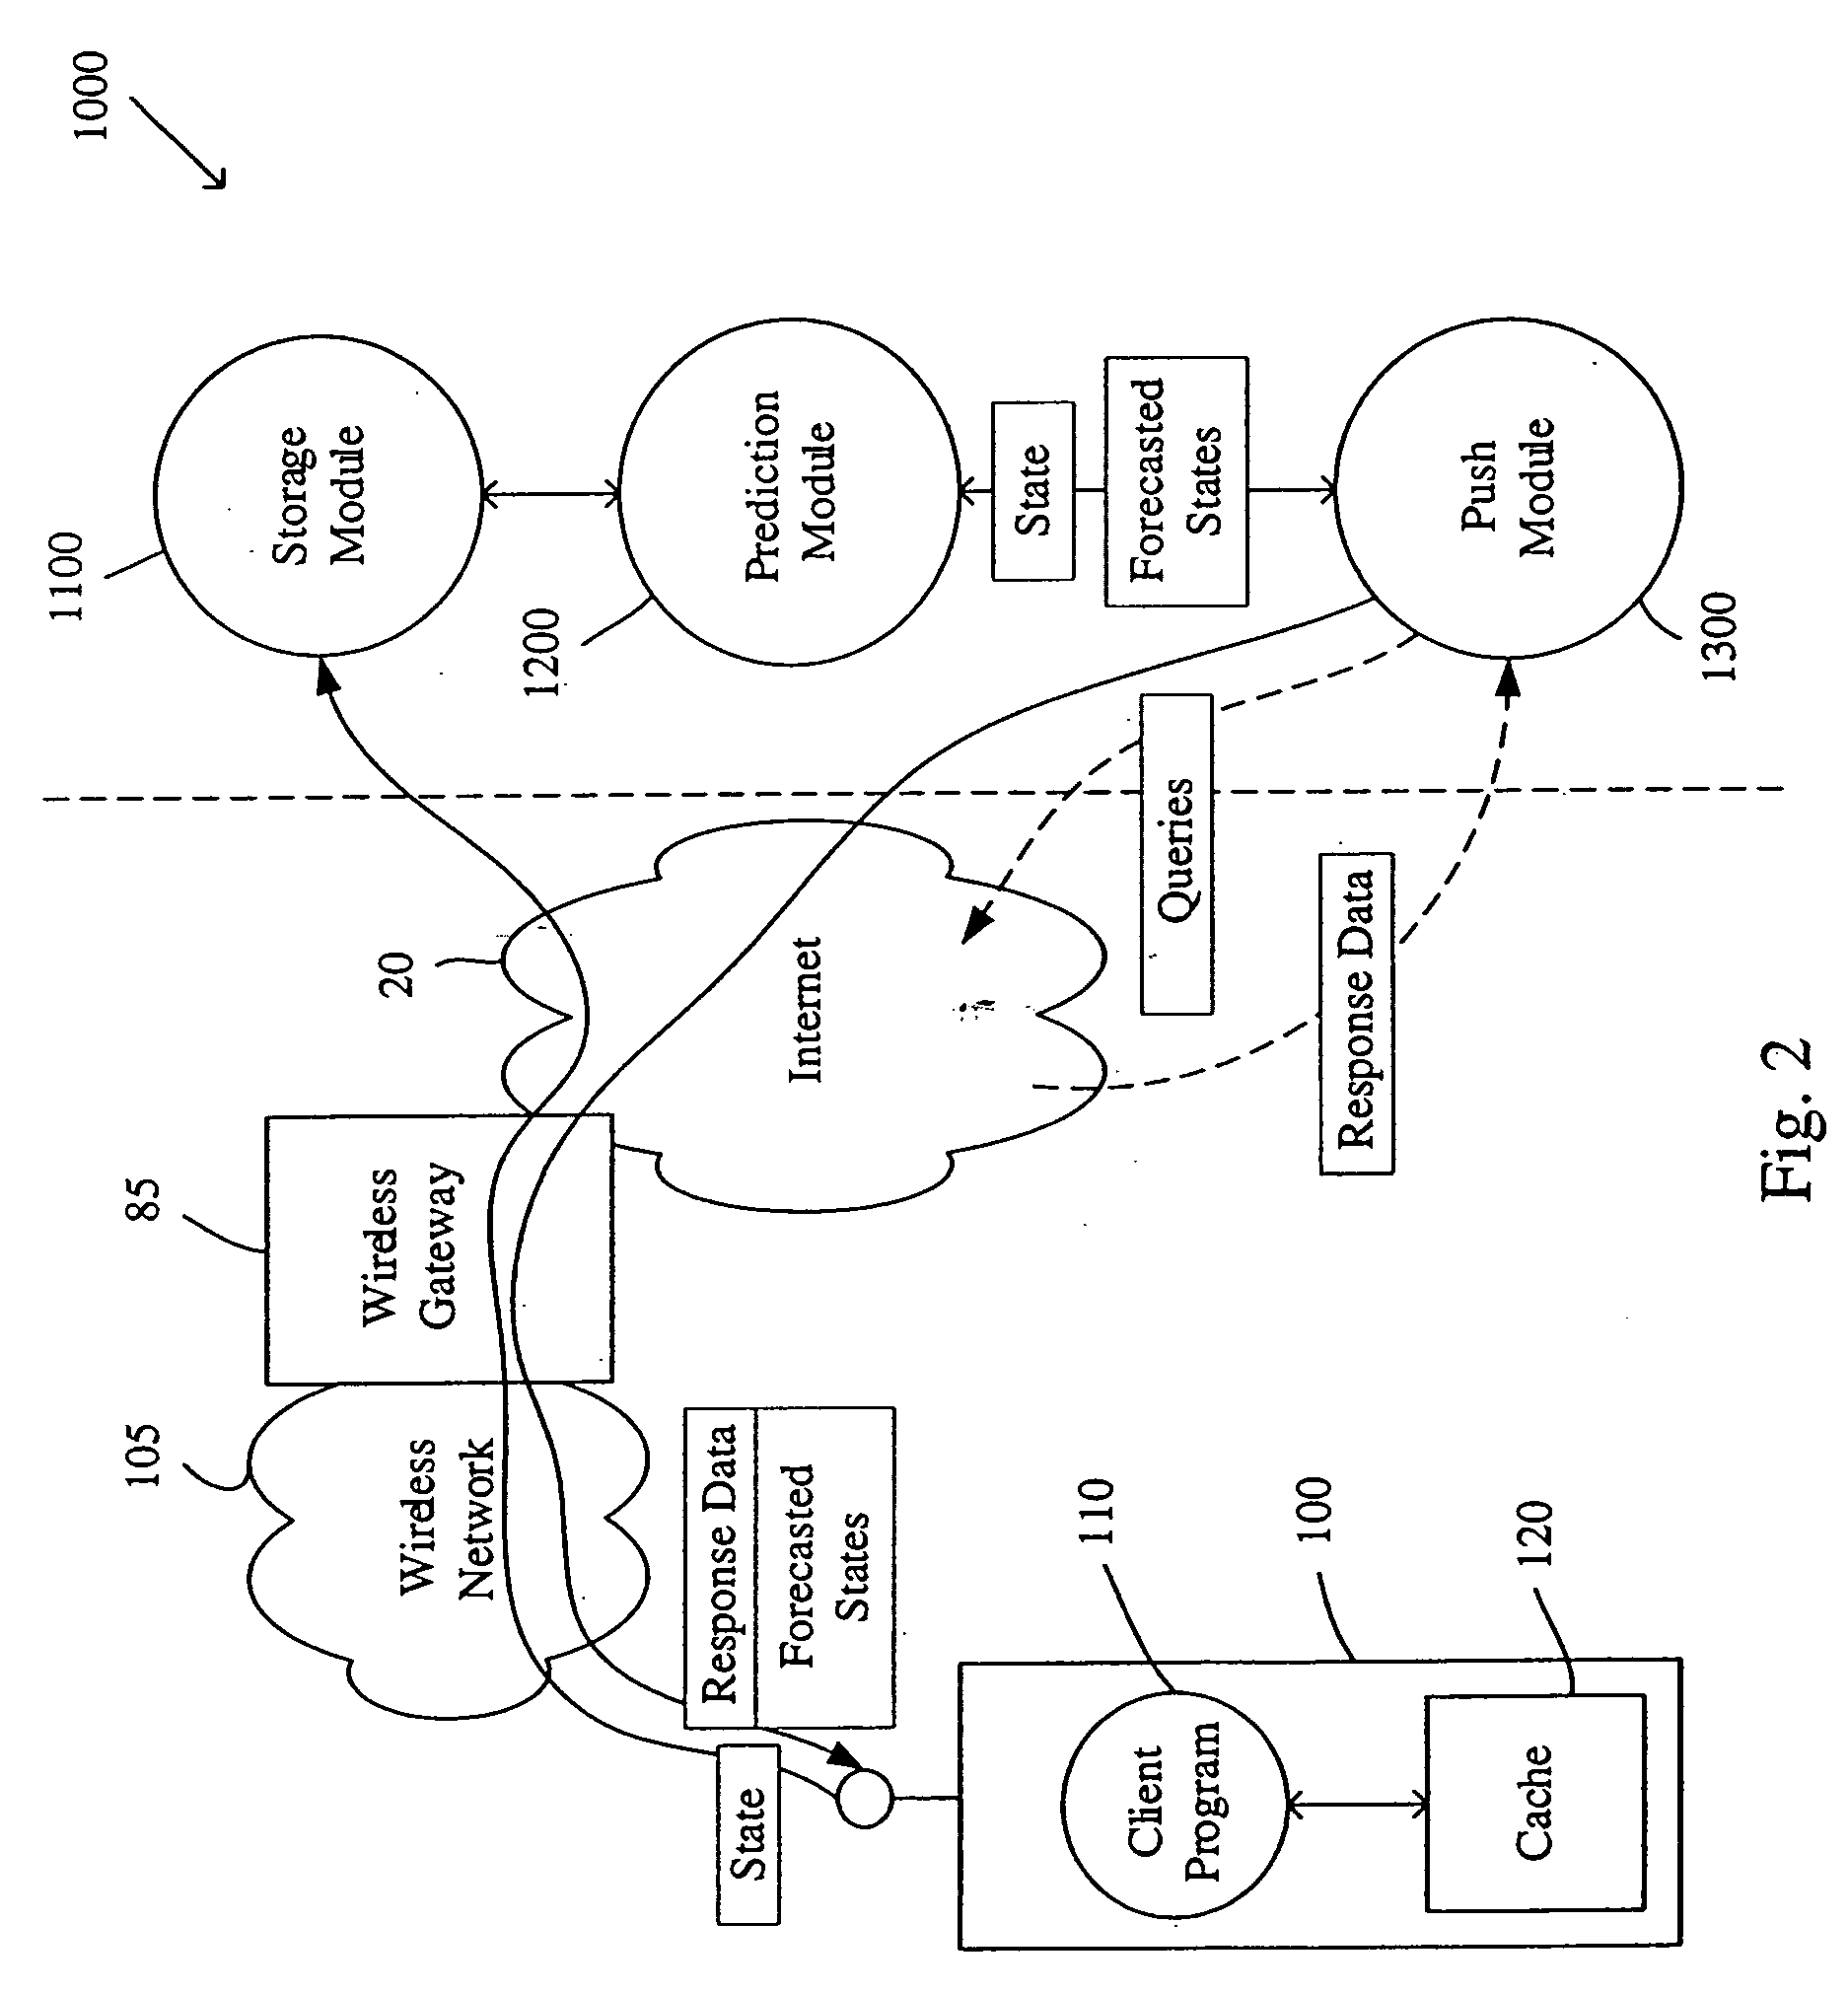 System and method for pushing data to a mobile device